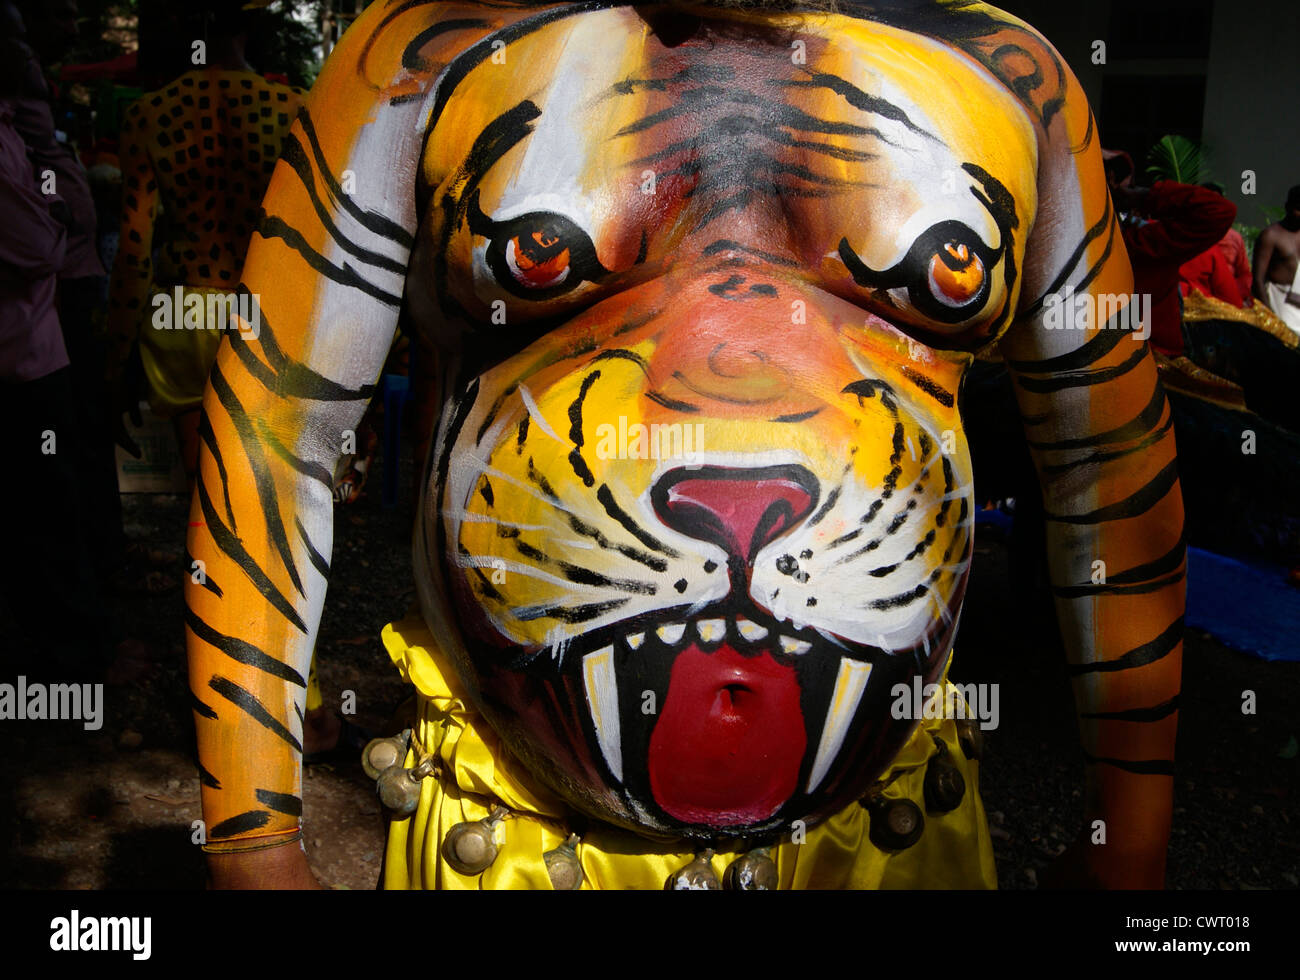 Tiger Face on Body Art from Pulikali dancer Belly Stomach in Onam celebrations at Kerala India.Recreational Indian folk arts Stock Photo